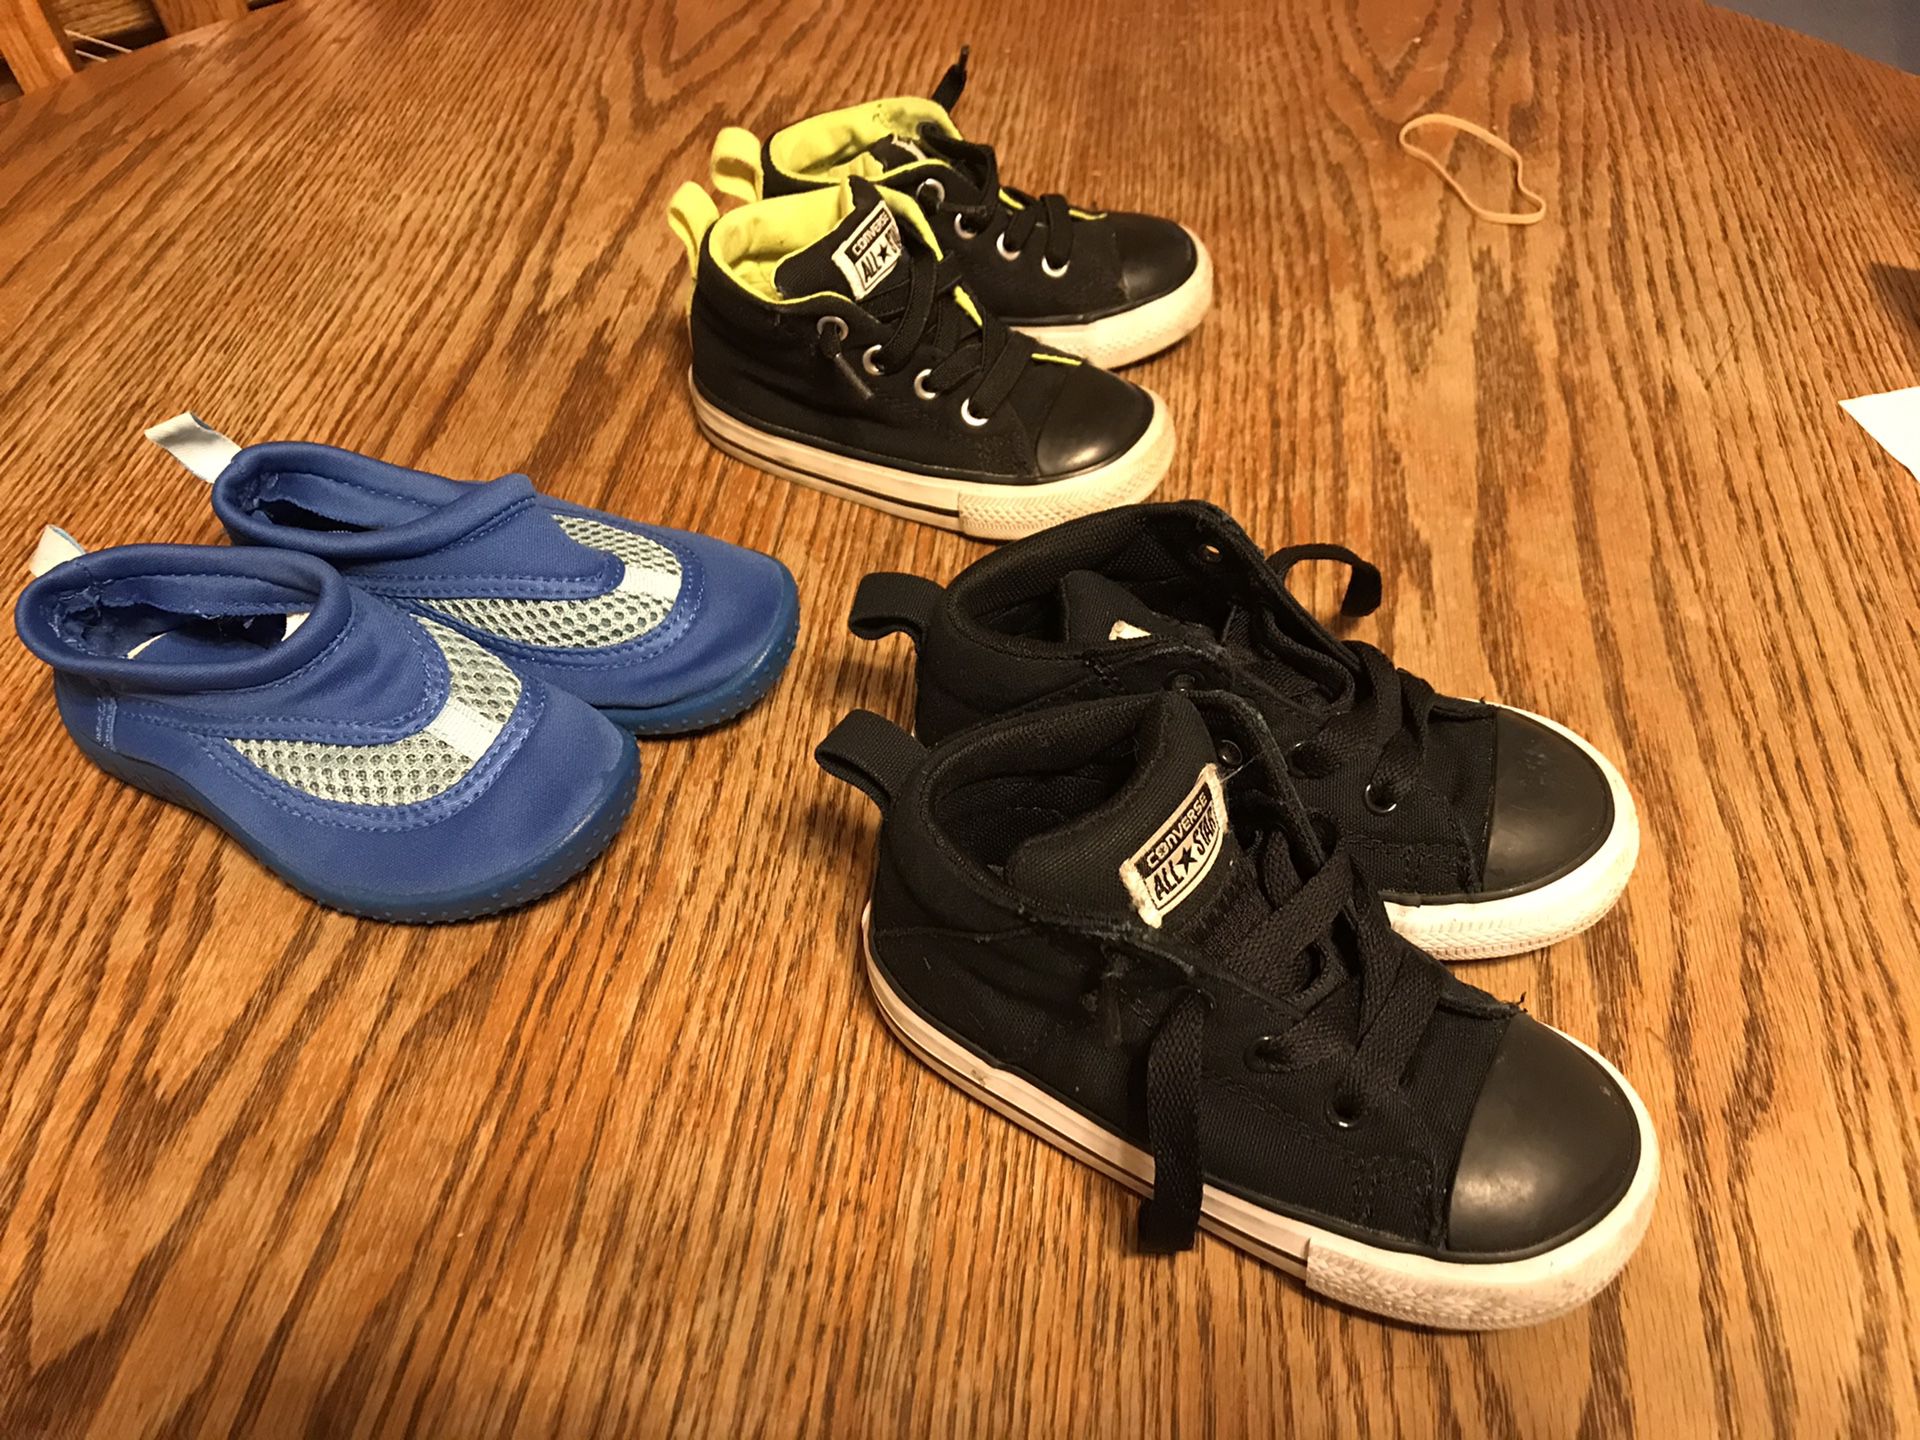 Toddler boys shoes